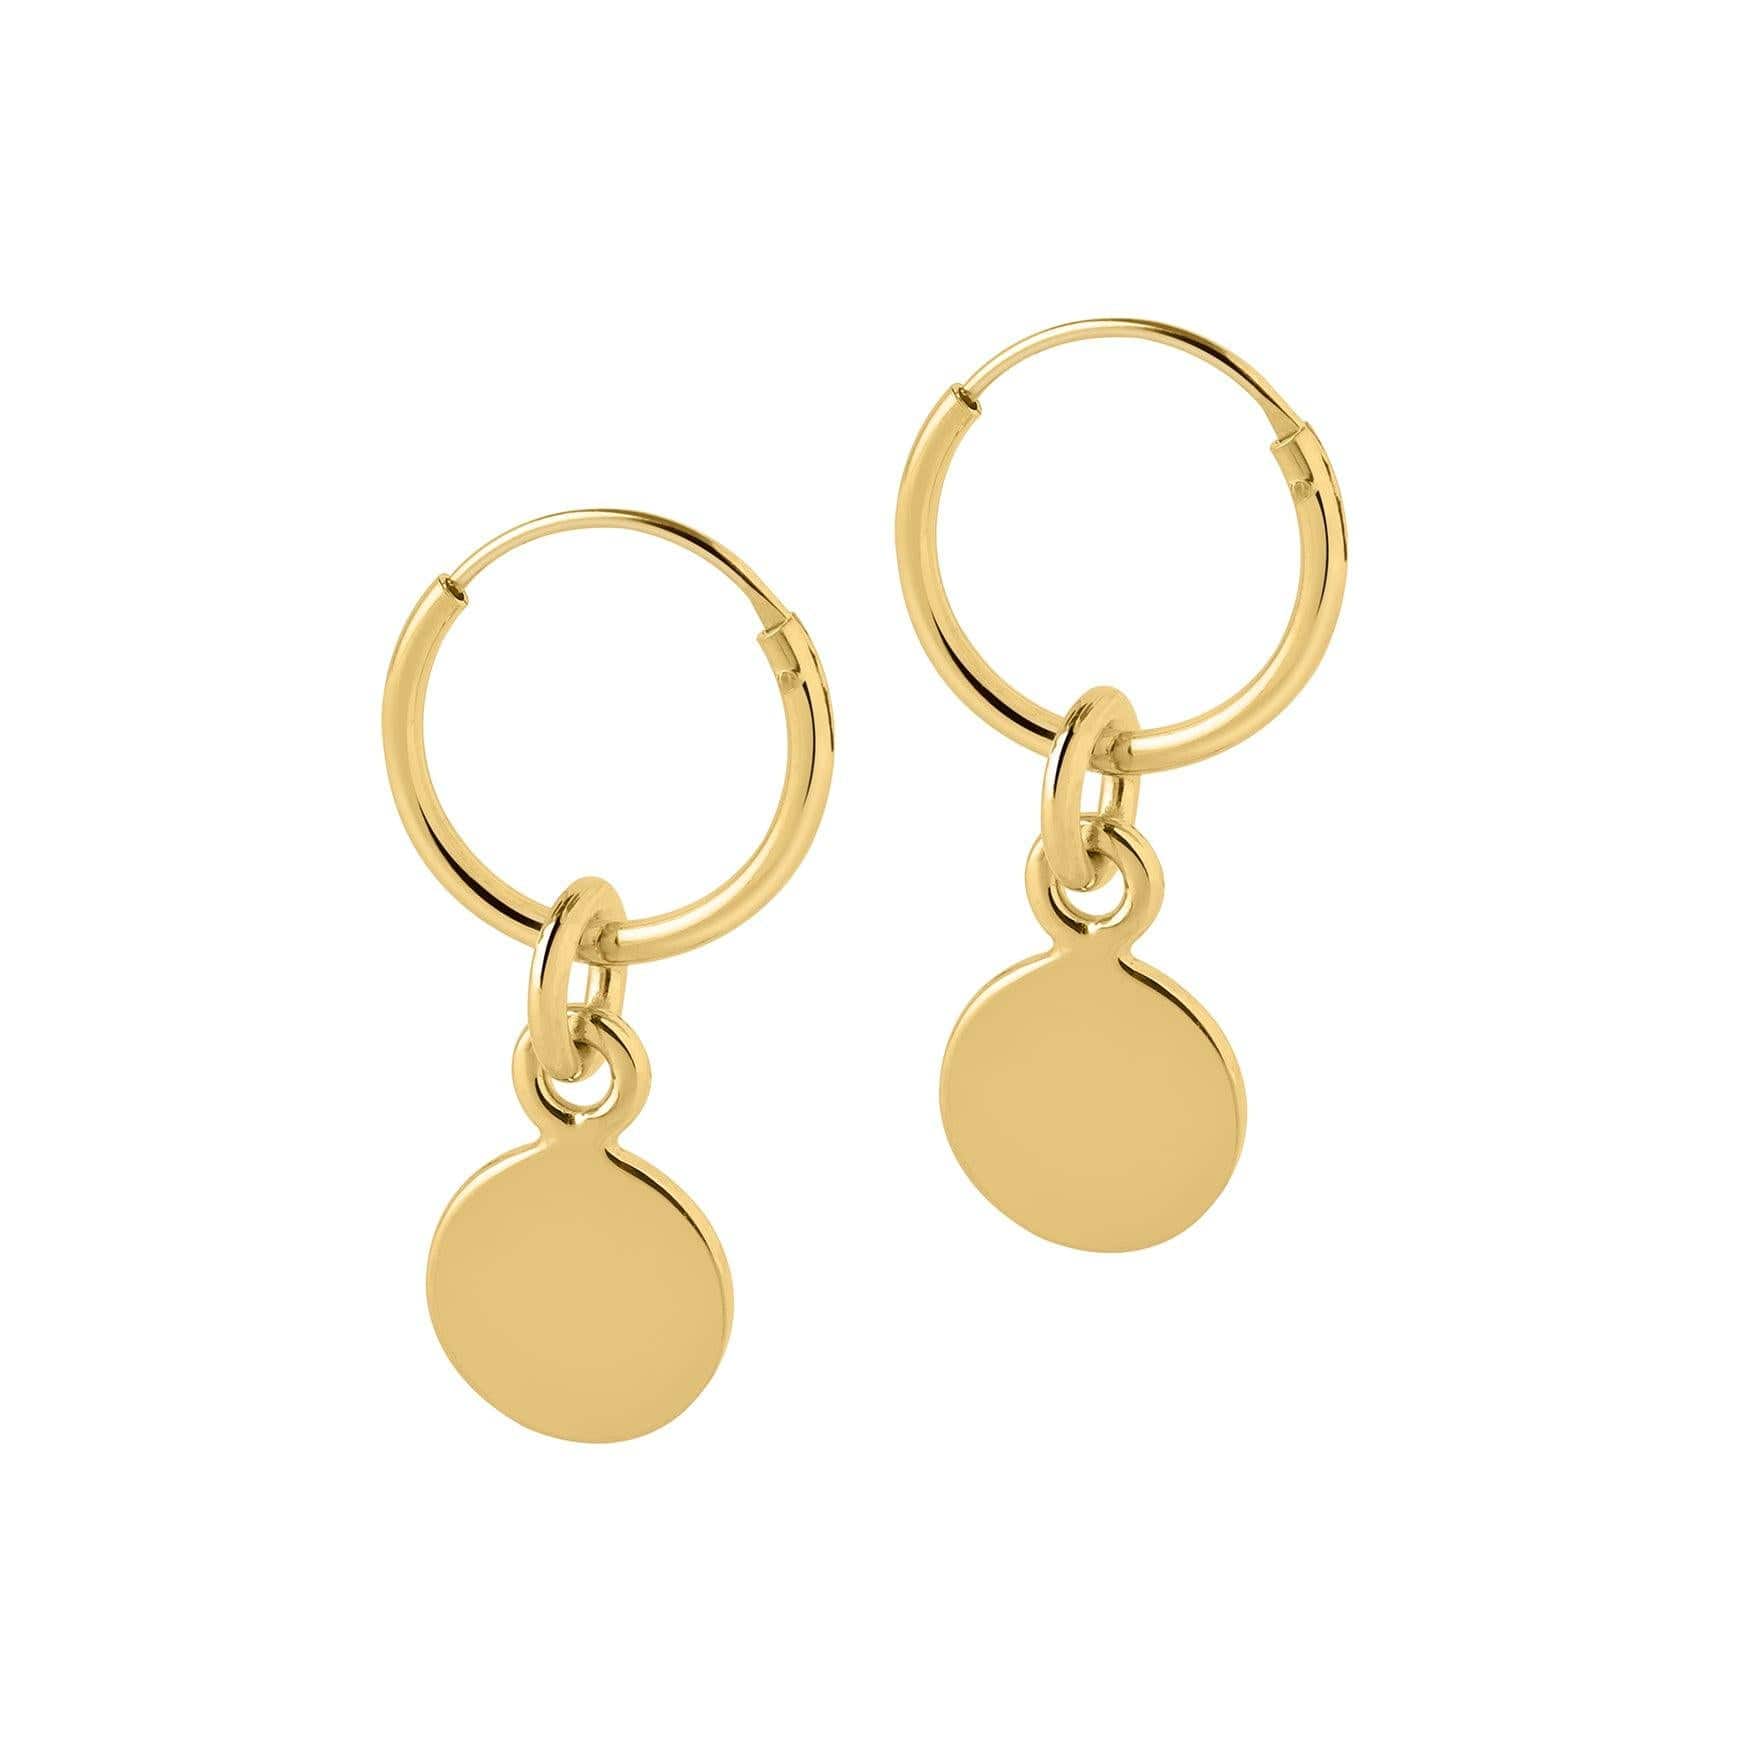 12 mm gold plated hoop earrings with round pendant